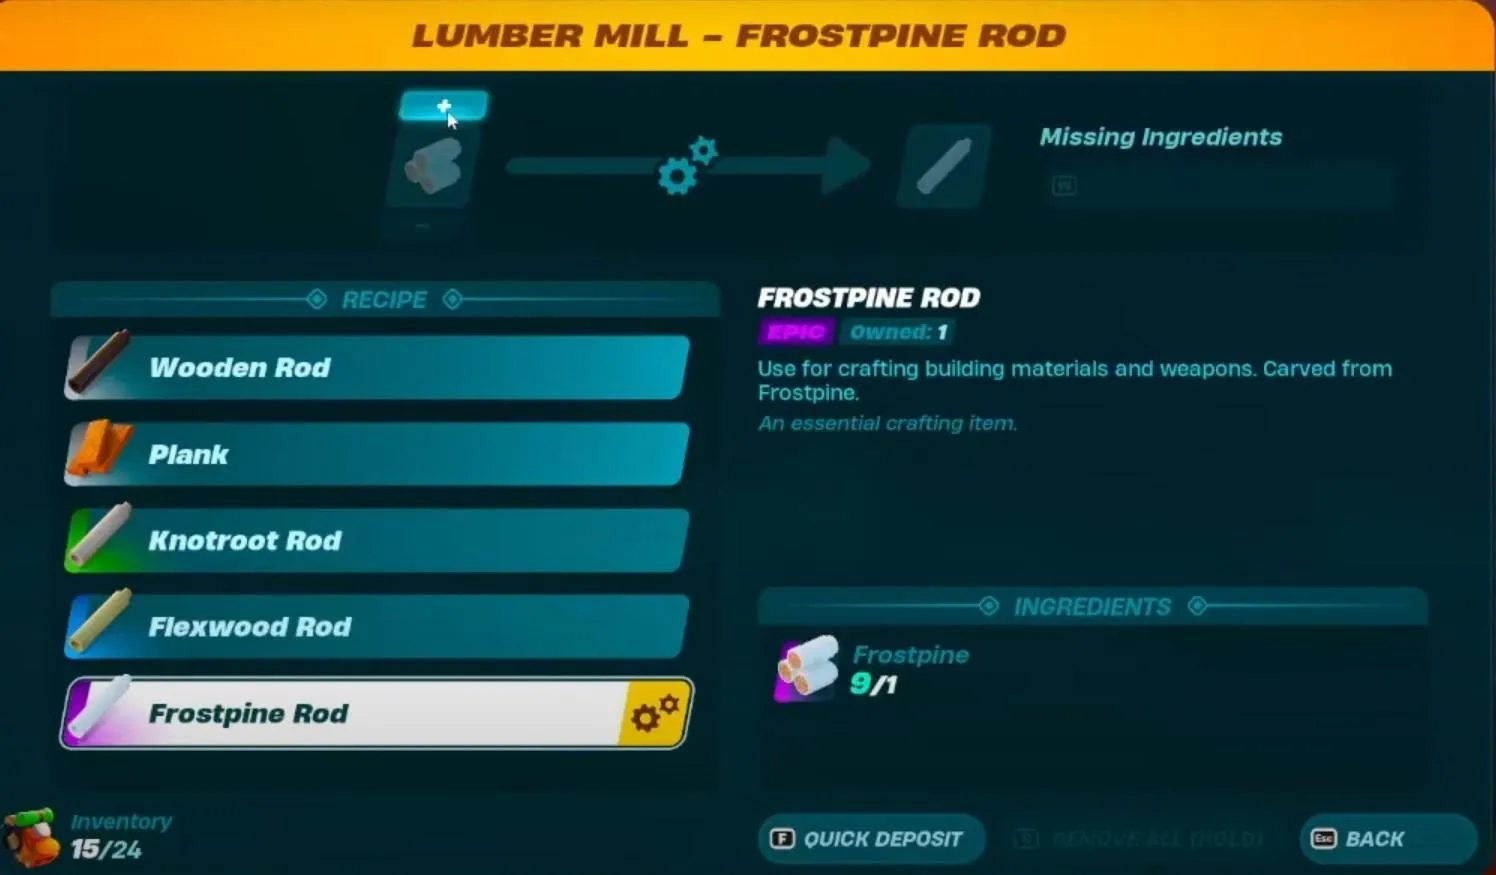 How To Get Frostpine and Craft Frostpine Rod in LEGO Fortnite